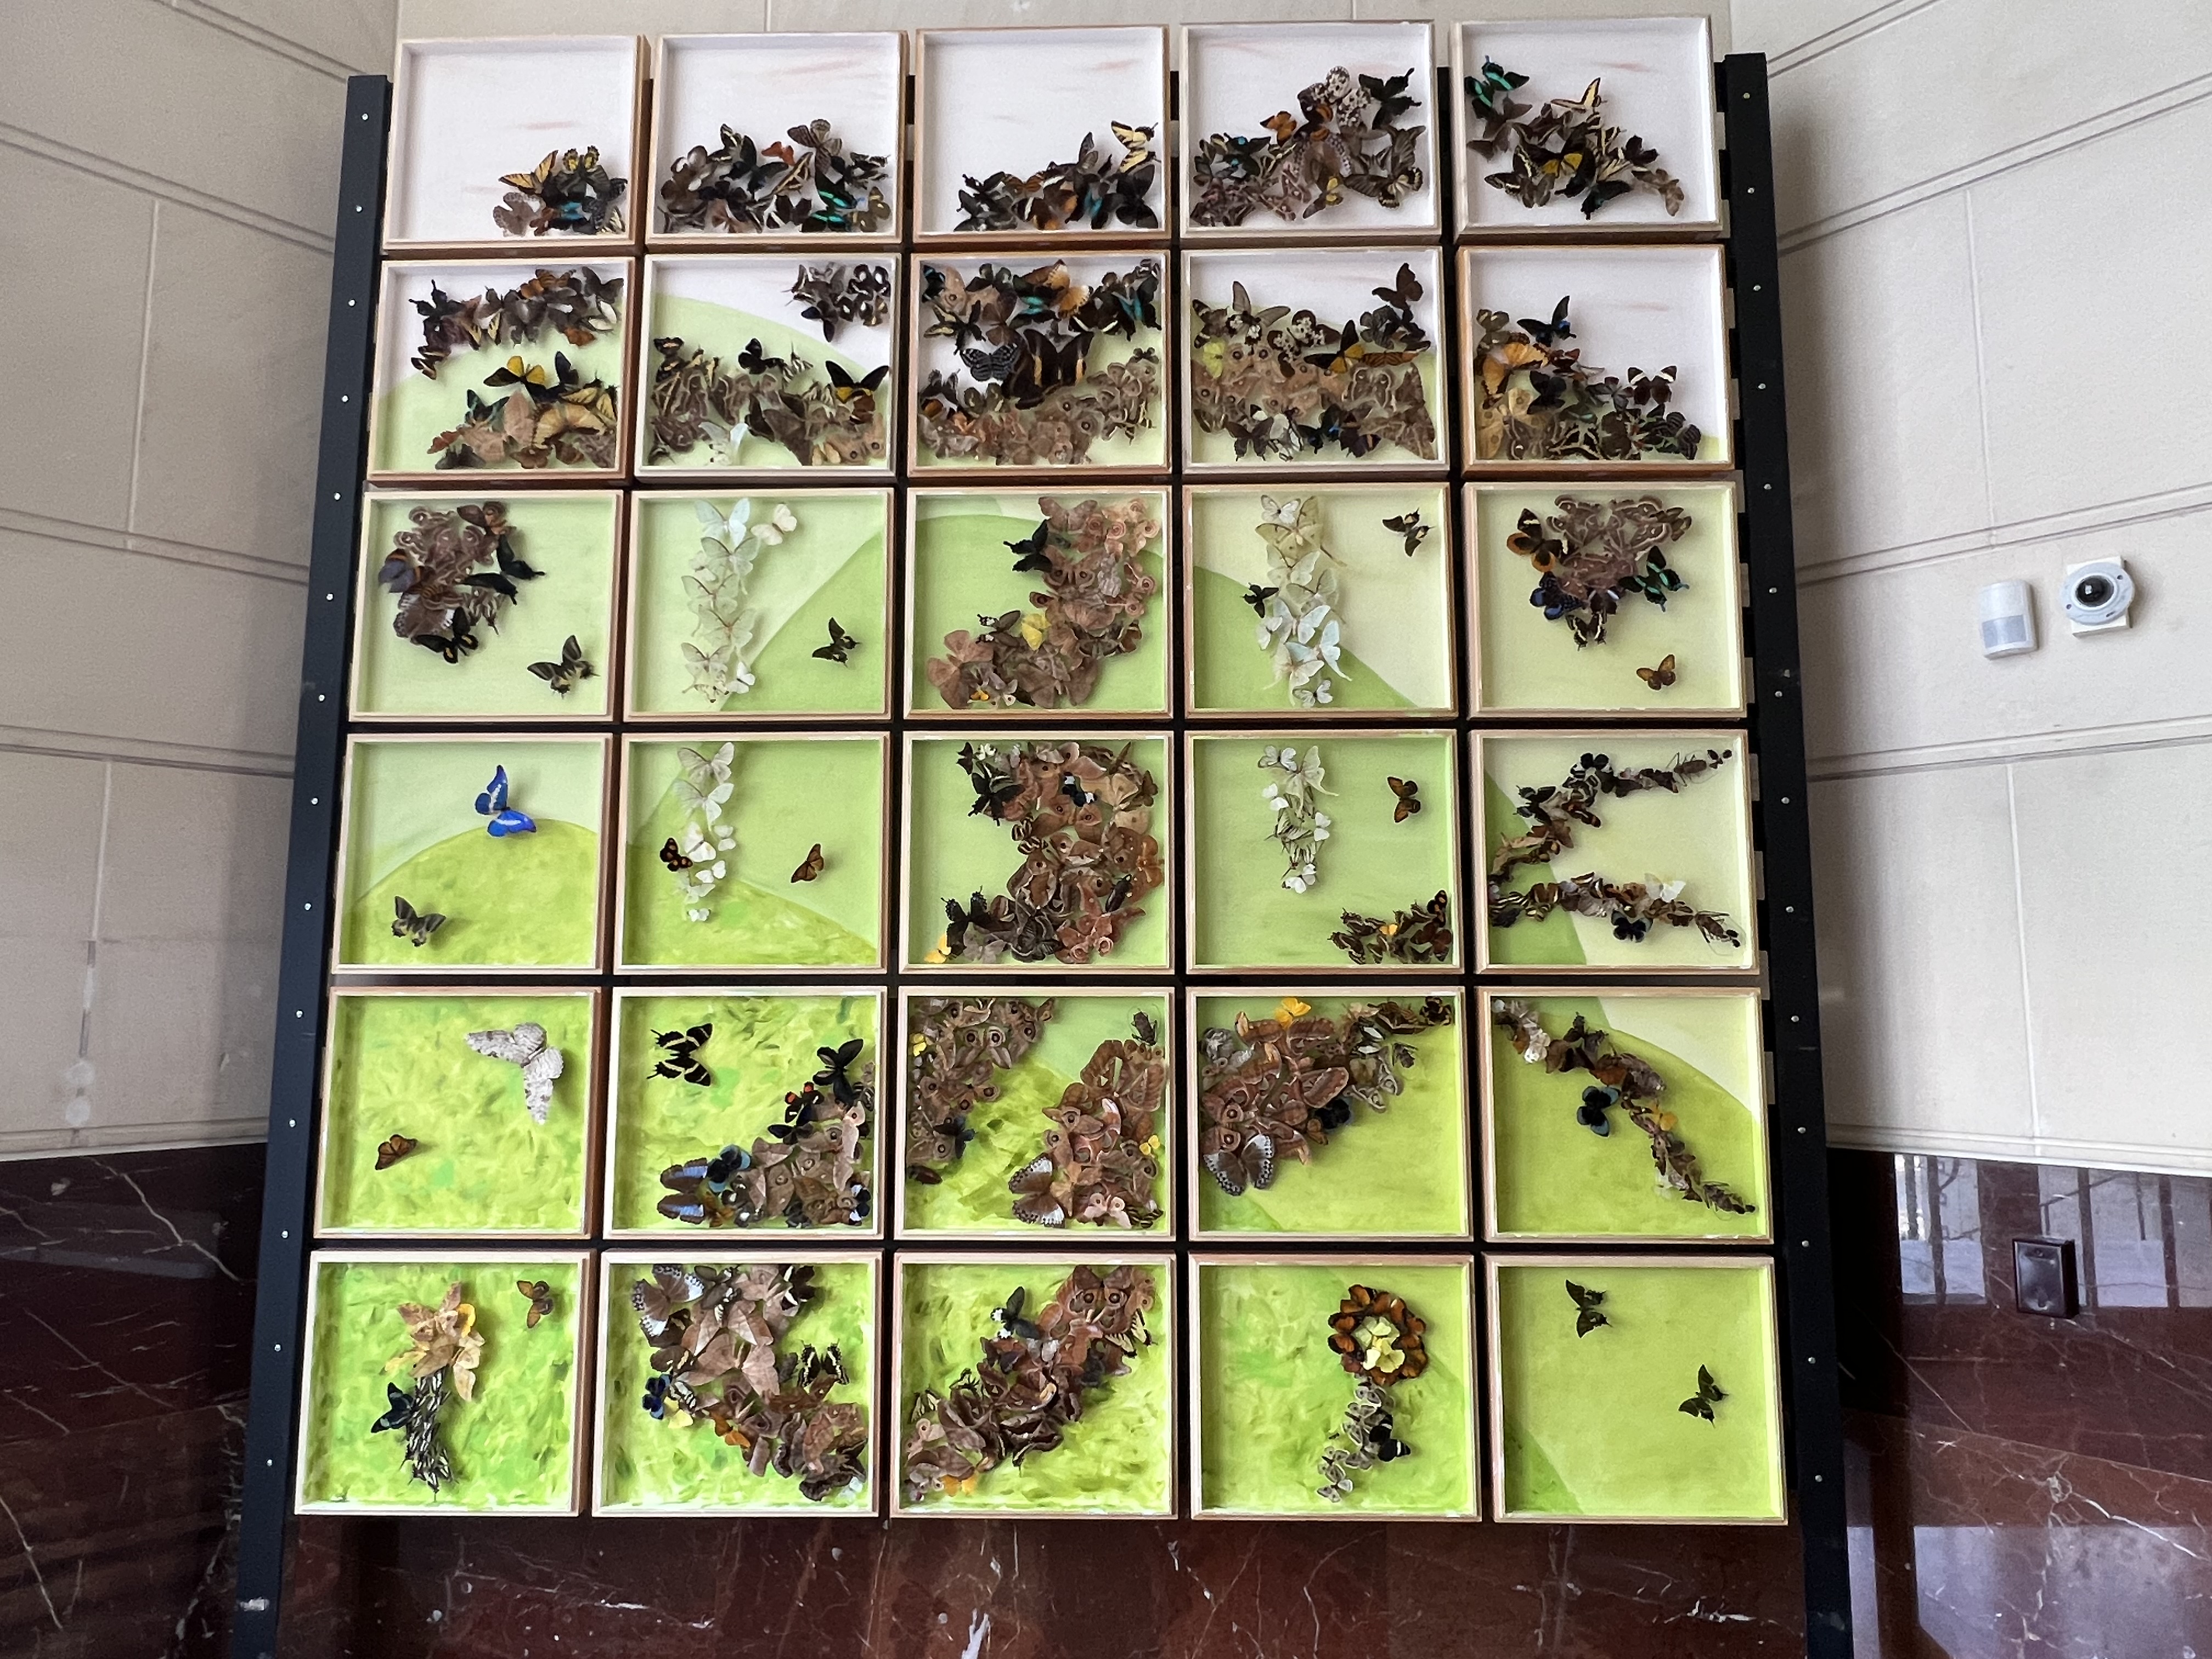 An image of preserved insects in the shape of a tree with handpainted green background